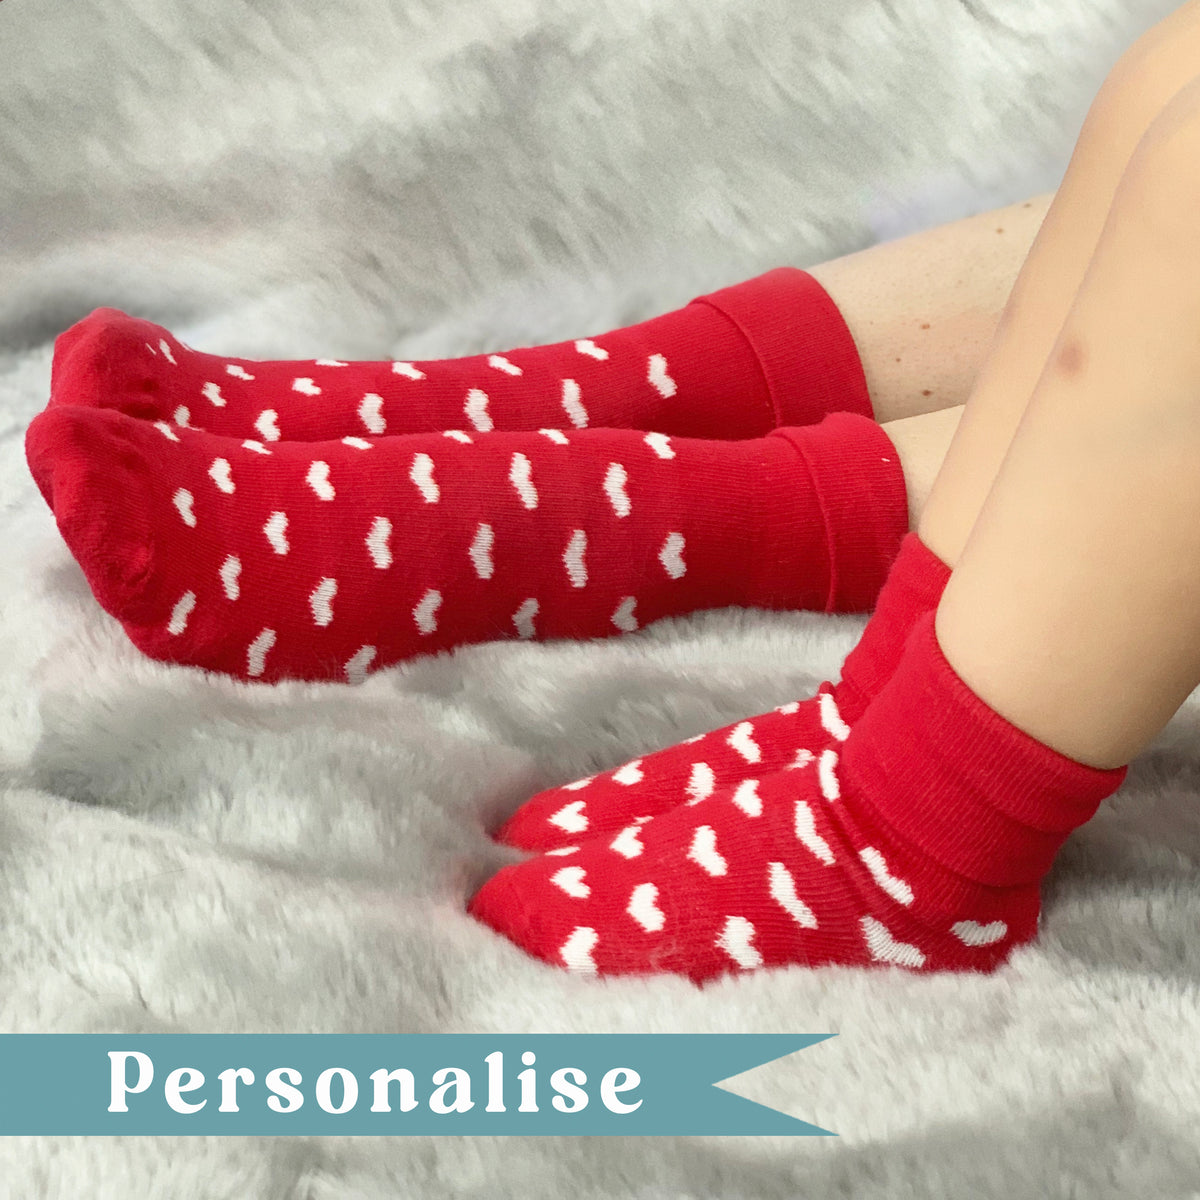 Personalised Mini Me Matching Adult and Child Socks Set in Red Hearts - The Perfect Personalised Birthday or Christmas Gift ♥️